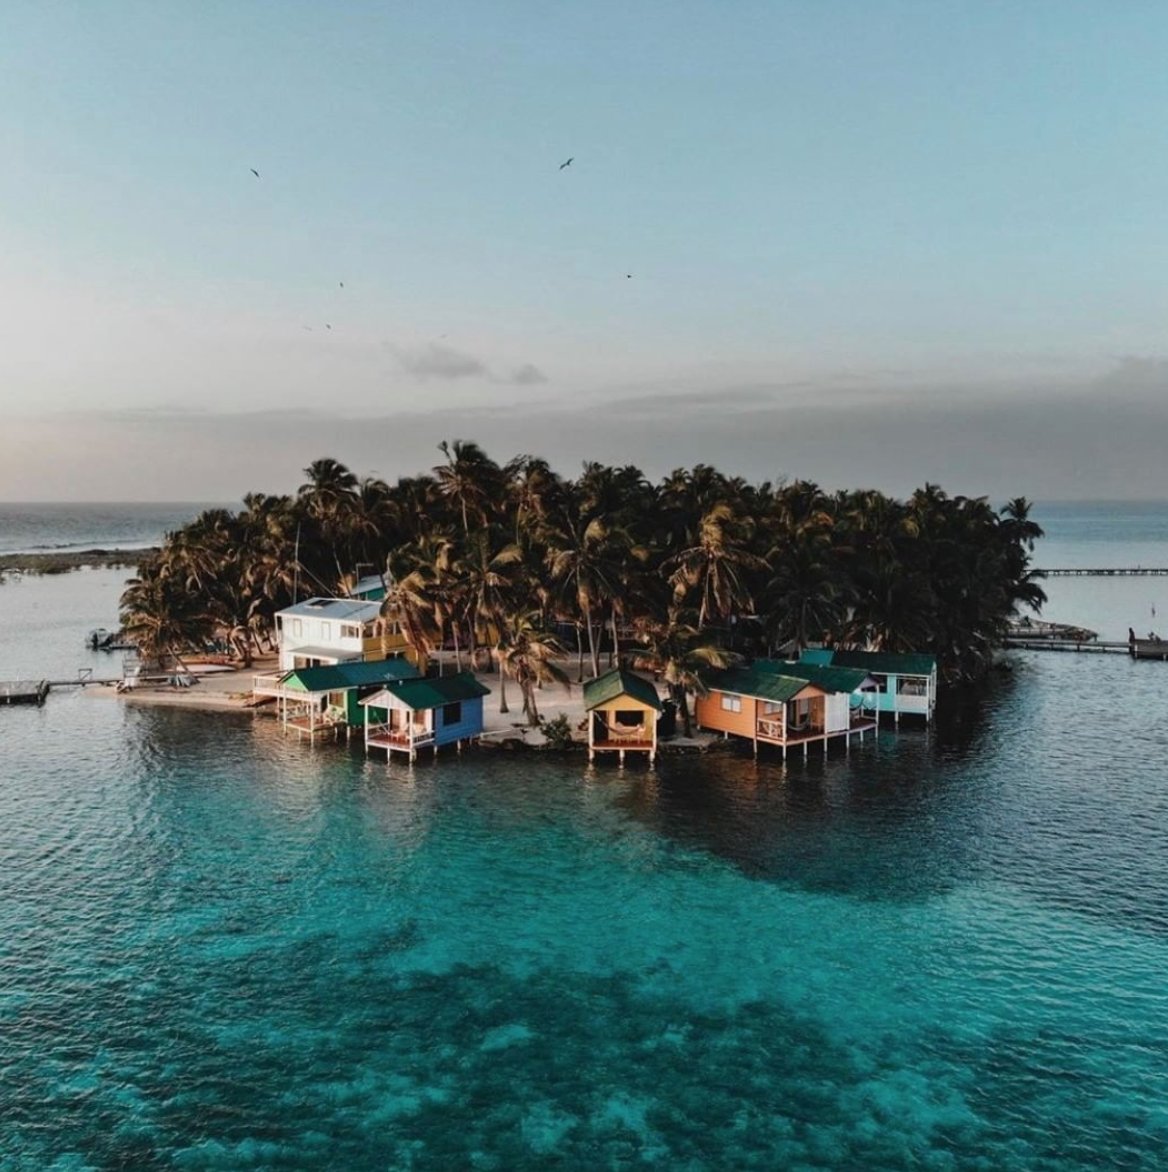 We wouldn't mind being stranded here for a bit...📍Tobacco Caye!
(IG📸jonathan_kuhn) #KeepCalmTravelOn